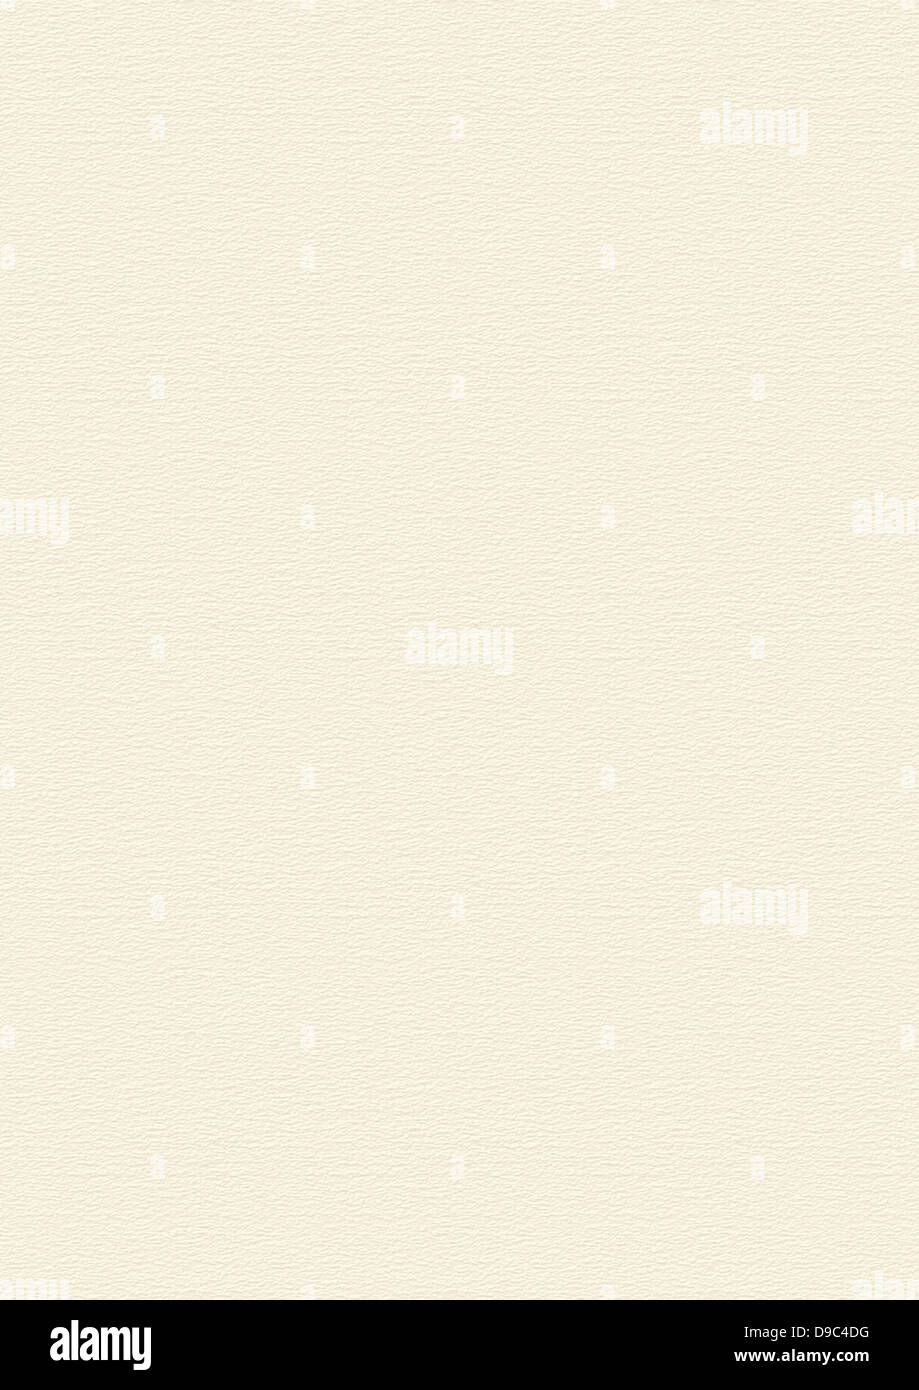 Cream, Beige Paper Texture Background very large format Stock